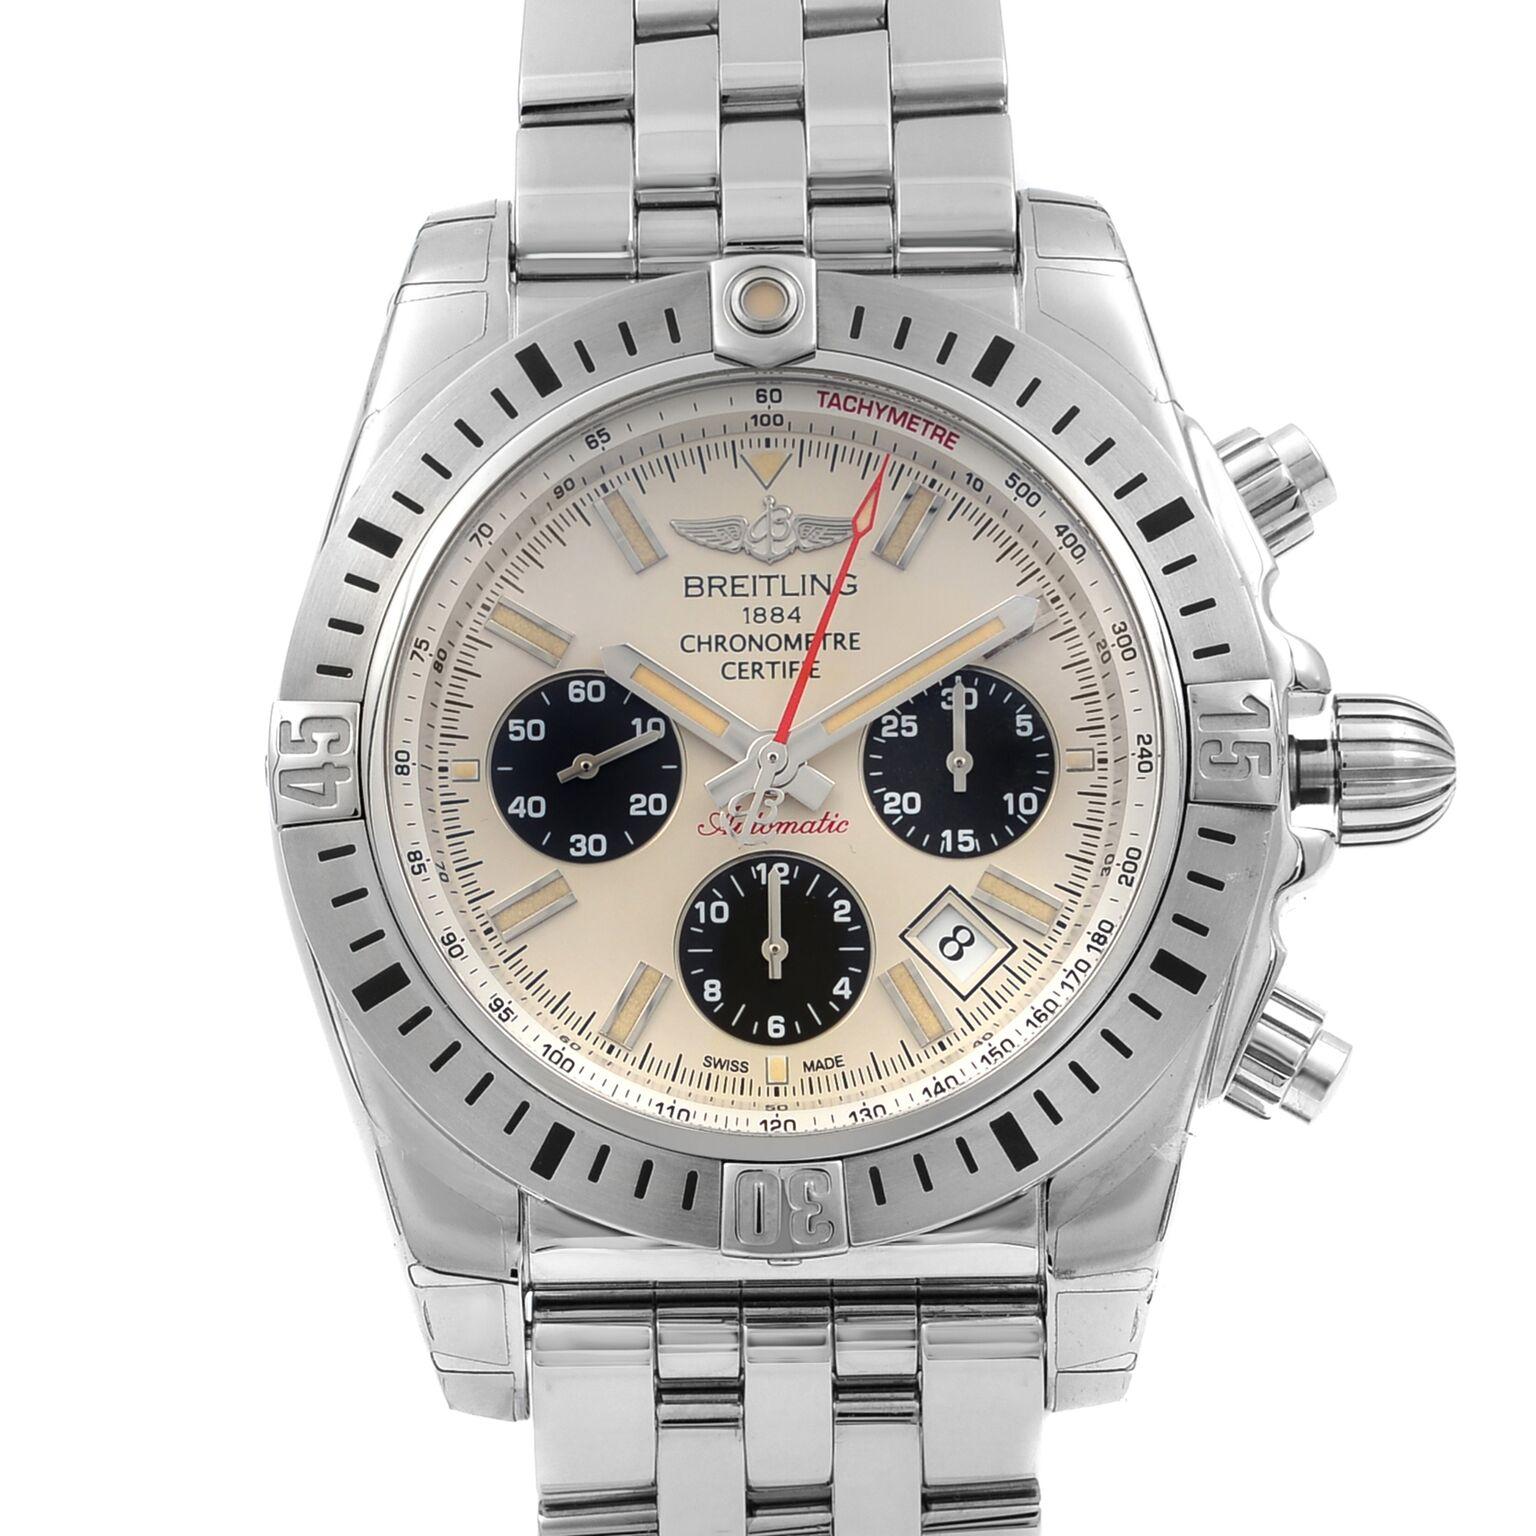 This display model Breitling Chronomat AB01154G/G786-375A is a beautiful men's timepiece that is powered by mechanical (automatic) movement which is cased in a stainless steel case. It has a round shape face, chronograph, date indicator, small